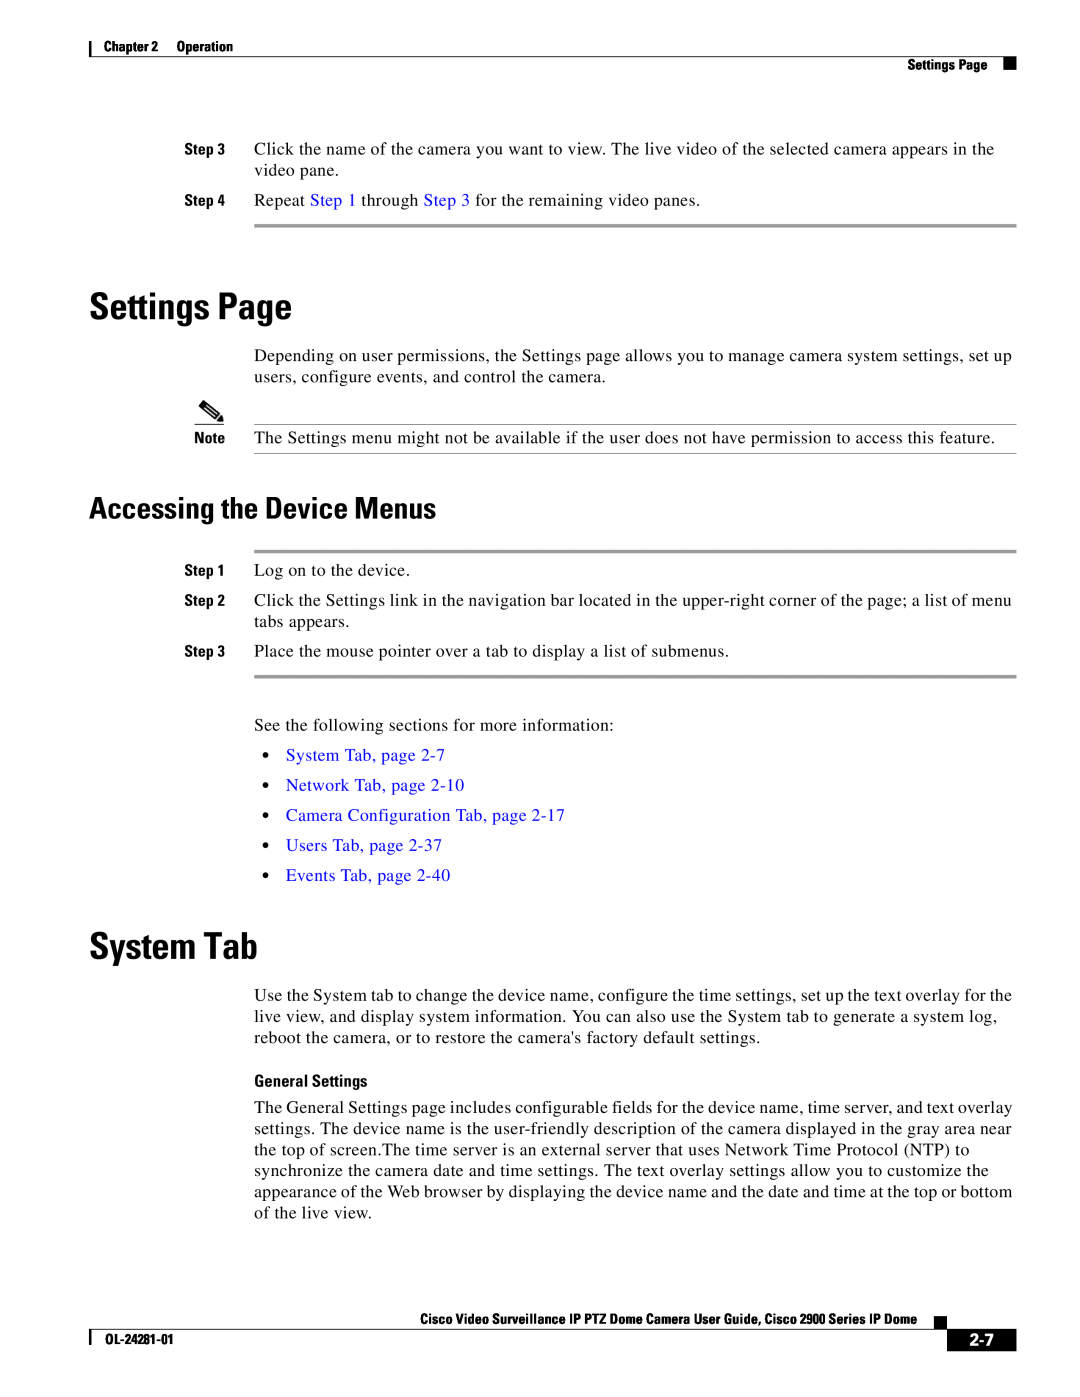 Cisco Systems 2900 Settings Page, Accessing the Device Menus, System Tab, page Network Tab, page, Events Tab, page 